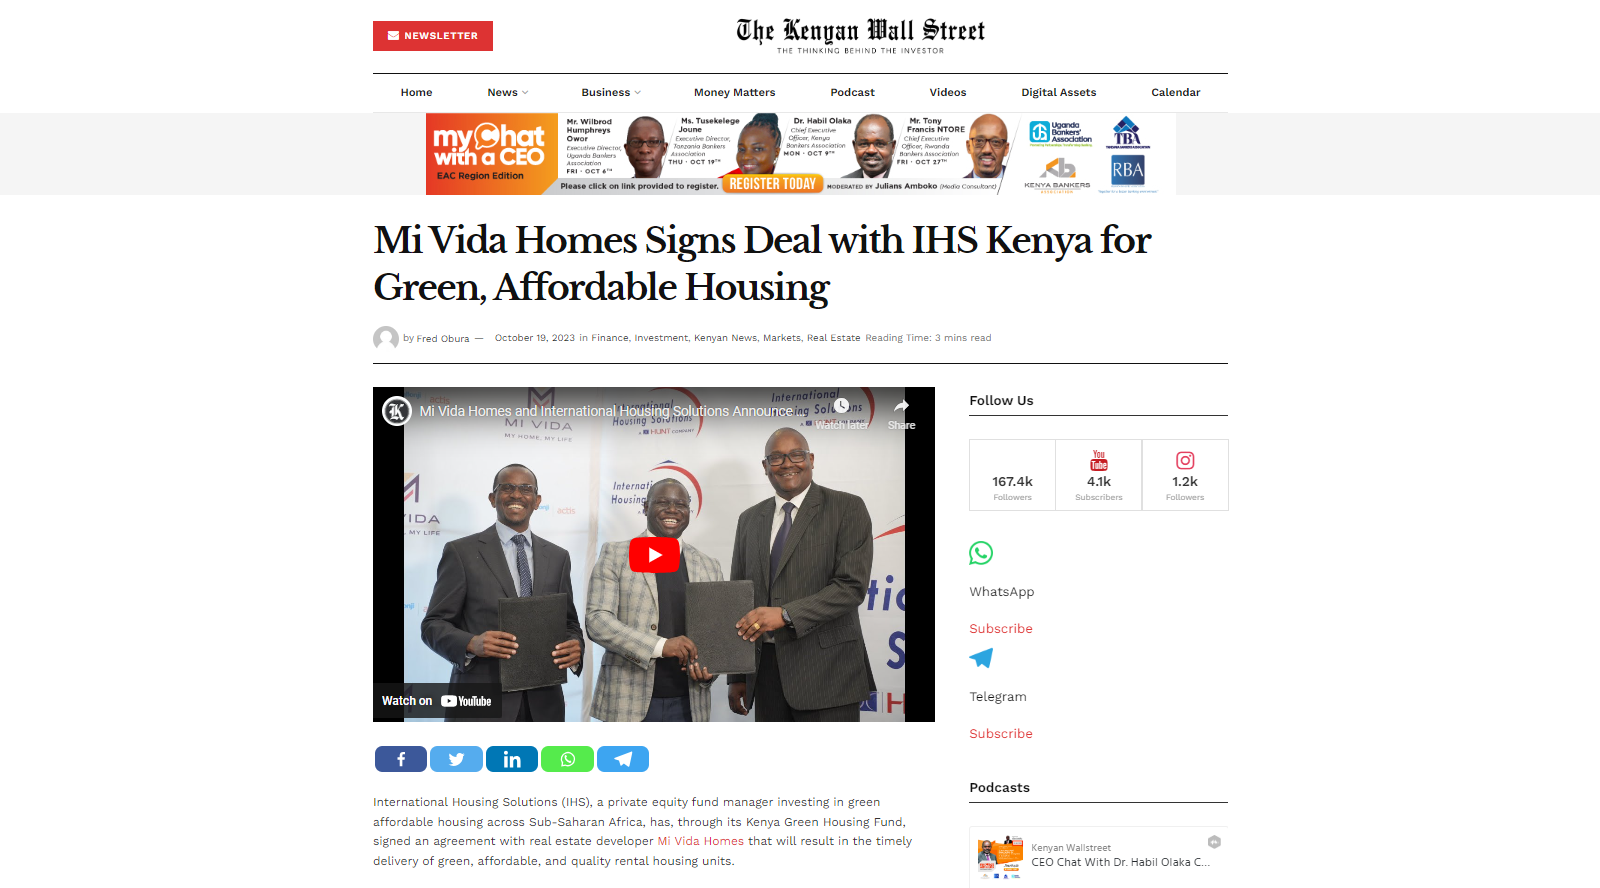 Mi Vida Homes Signs Deal with IHS Kenya for Green, Affordable Housing